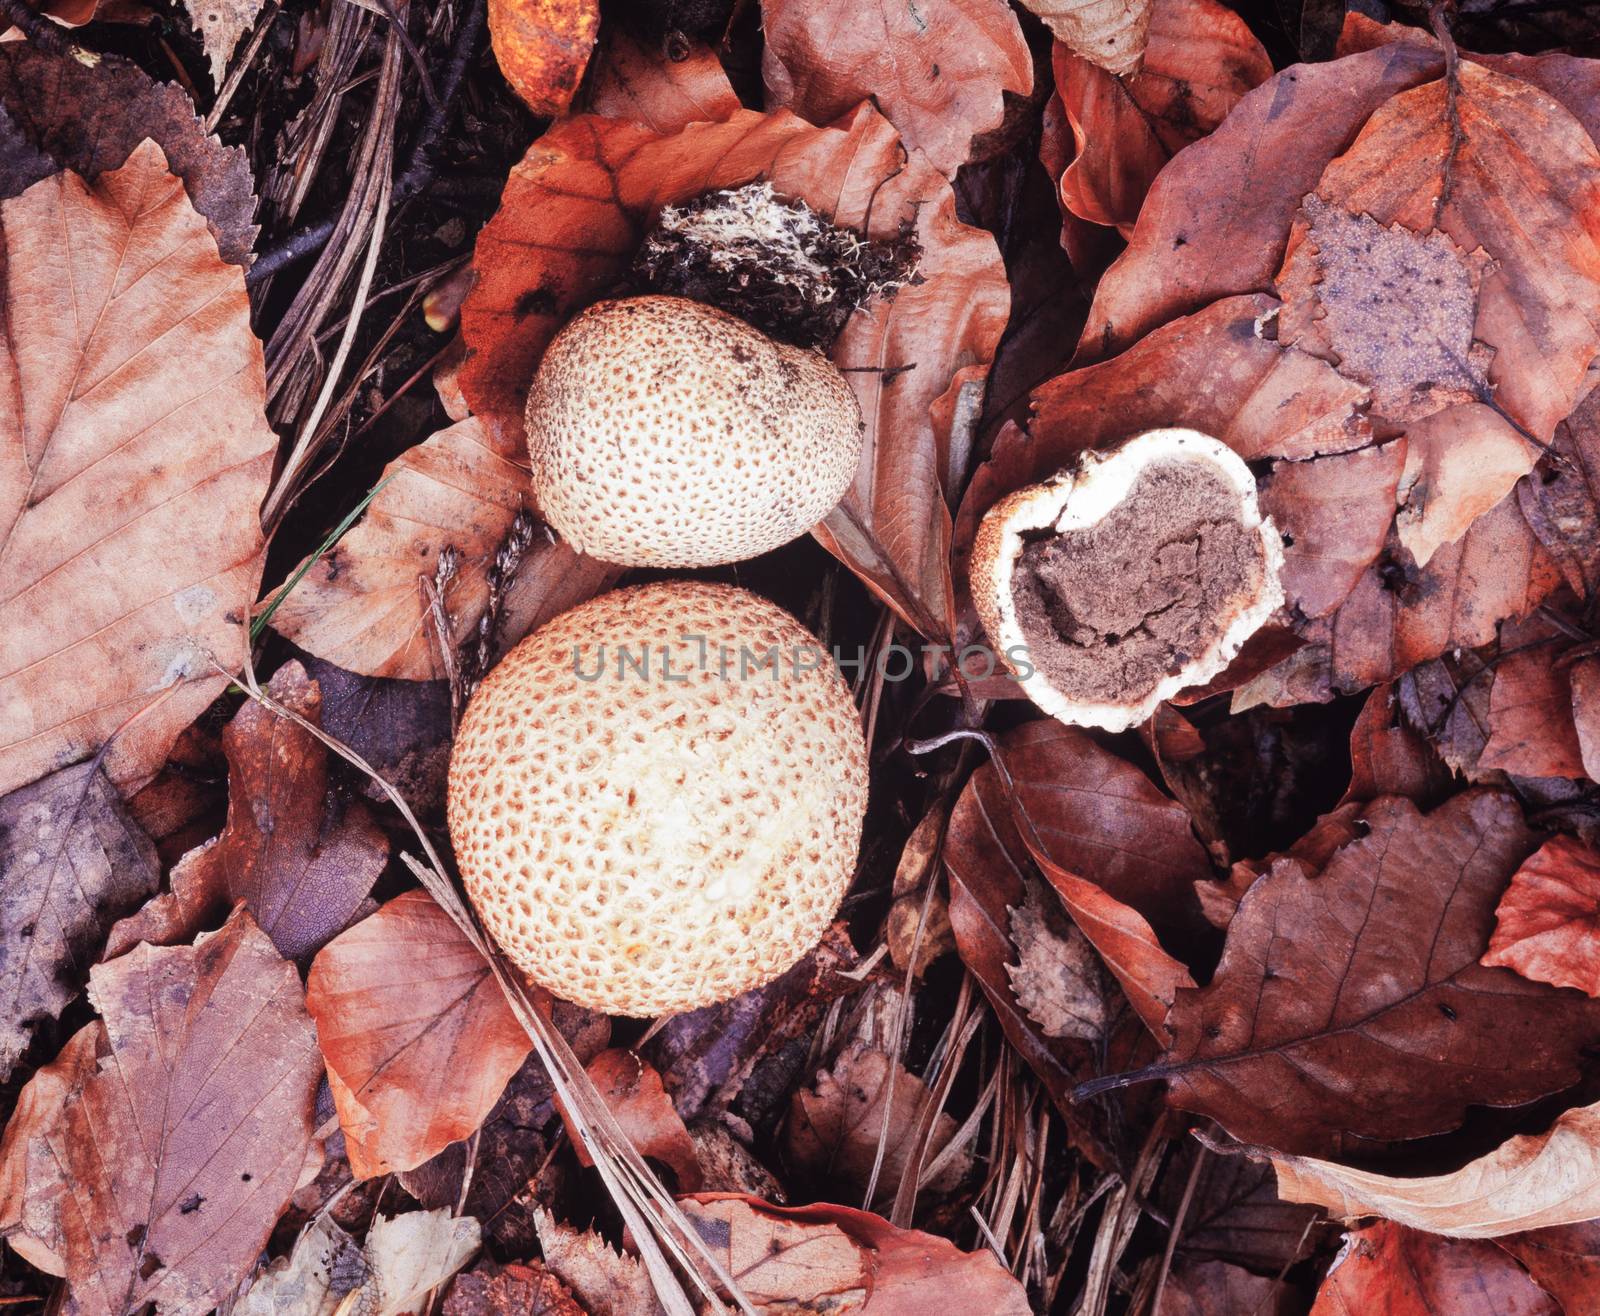 Common Earth Ball Scleroderma citrium mushrooms by PiLens